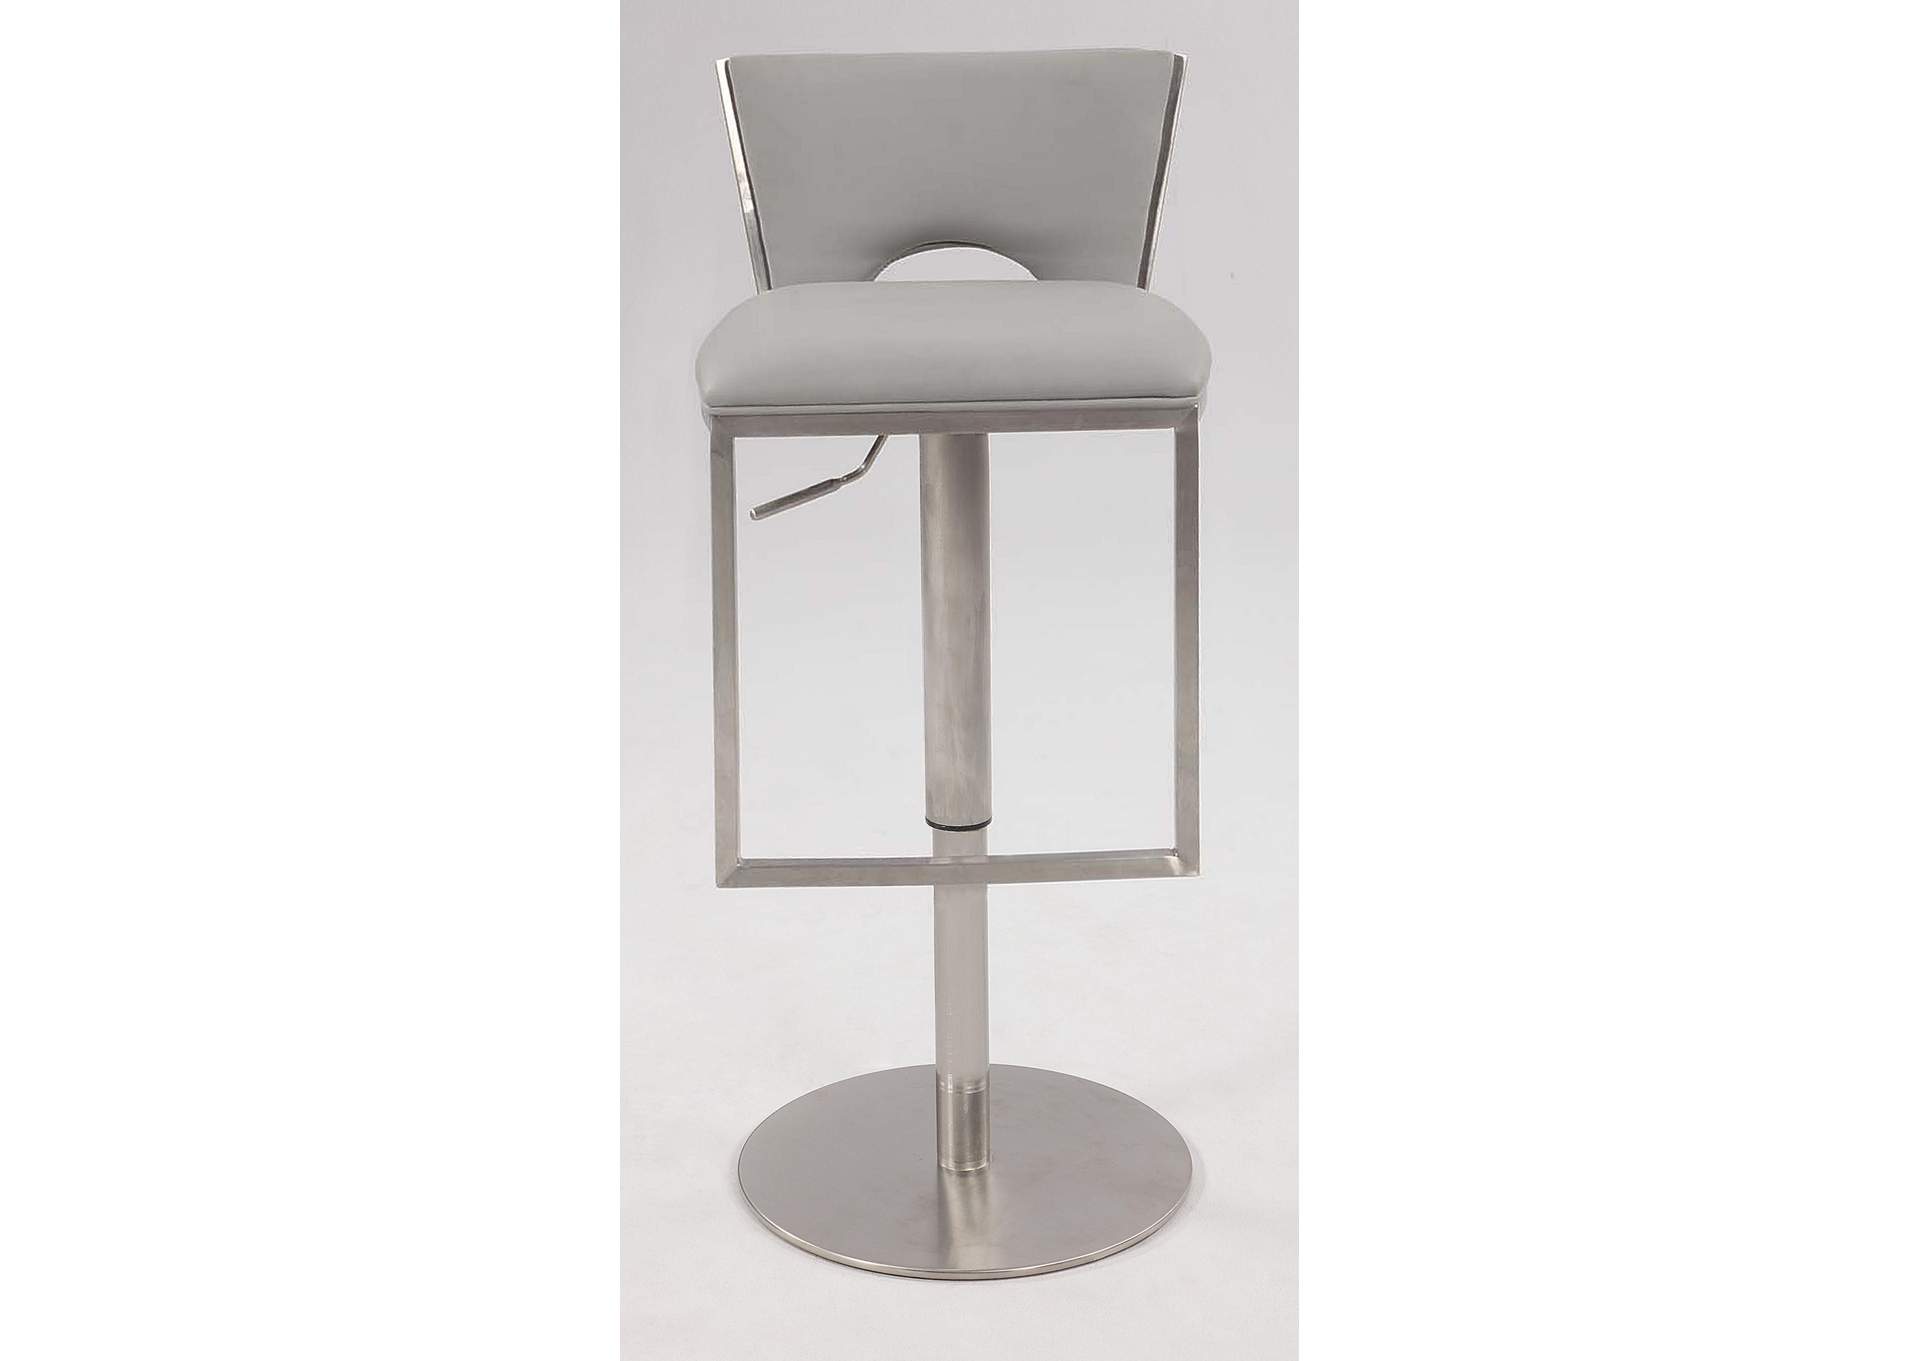 Low Back Upholstered Pneumatic-Adjustable Stool,Chintaly Imports